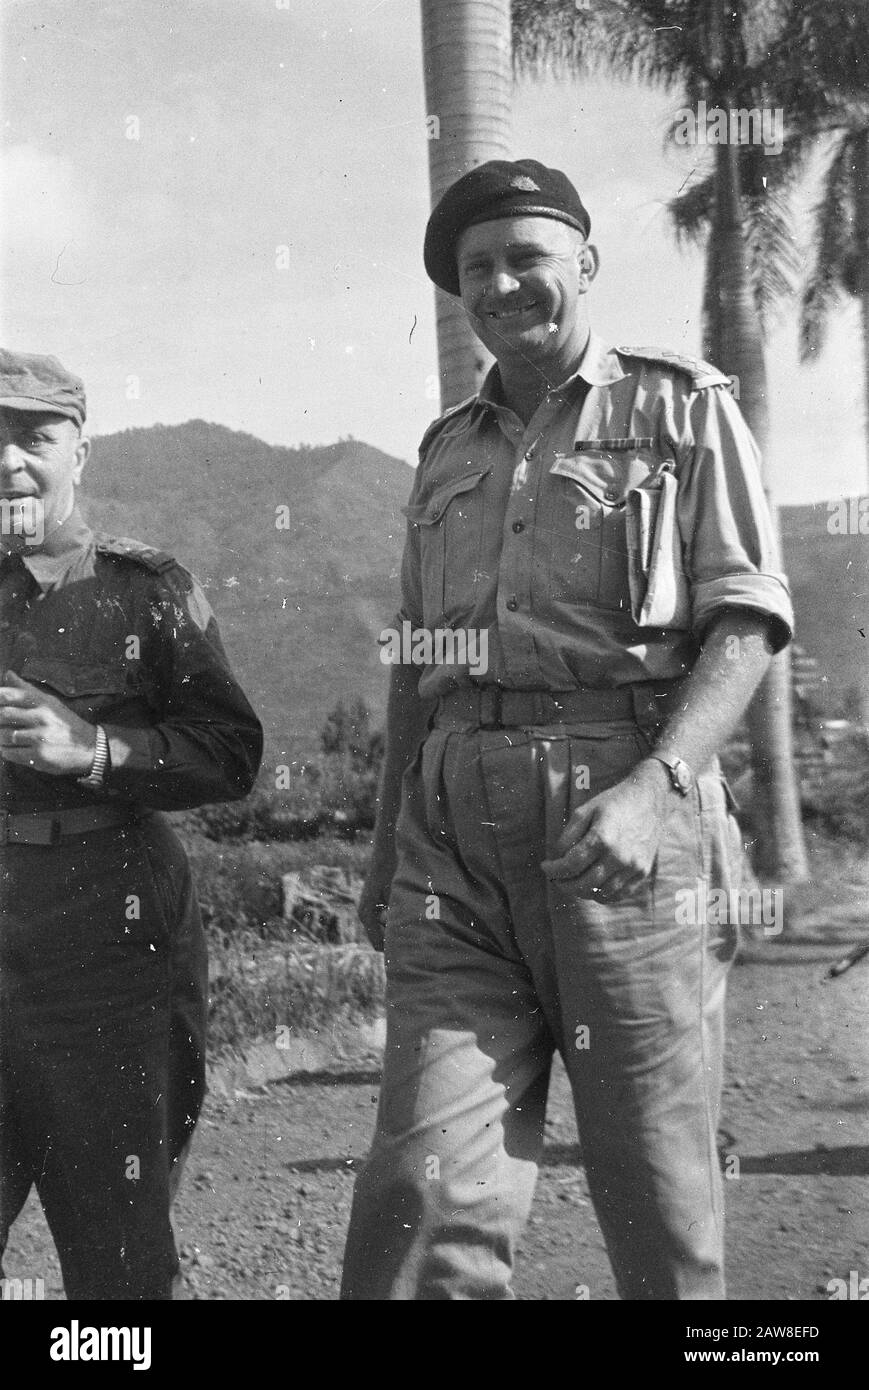 Inspection chief H.J. Kronig, Commander X Brigade East Java  [Lieutenant Colonel H.J. Kronig (left), accompanied by a British cavalry officer (rank: captain / captain) Annotation: Lieutenant Colonel H.J. Kronig was 26-2-1949 by the new commander of the brigade Date: March 1949 Location: Indonesia, Java, Dutch East Indies Stock Photo